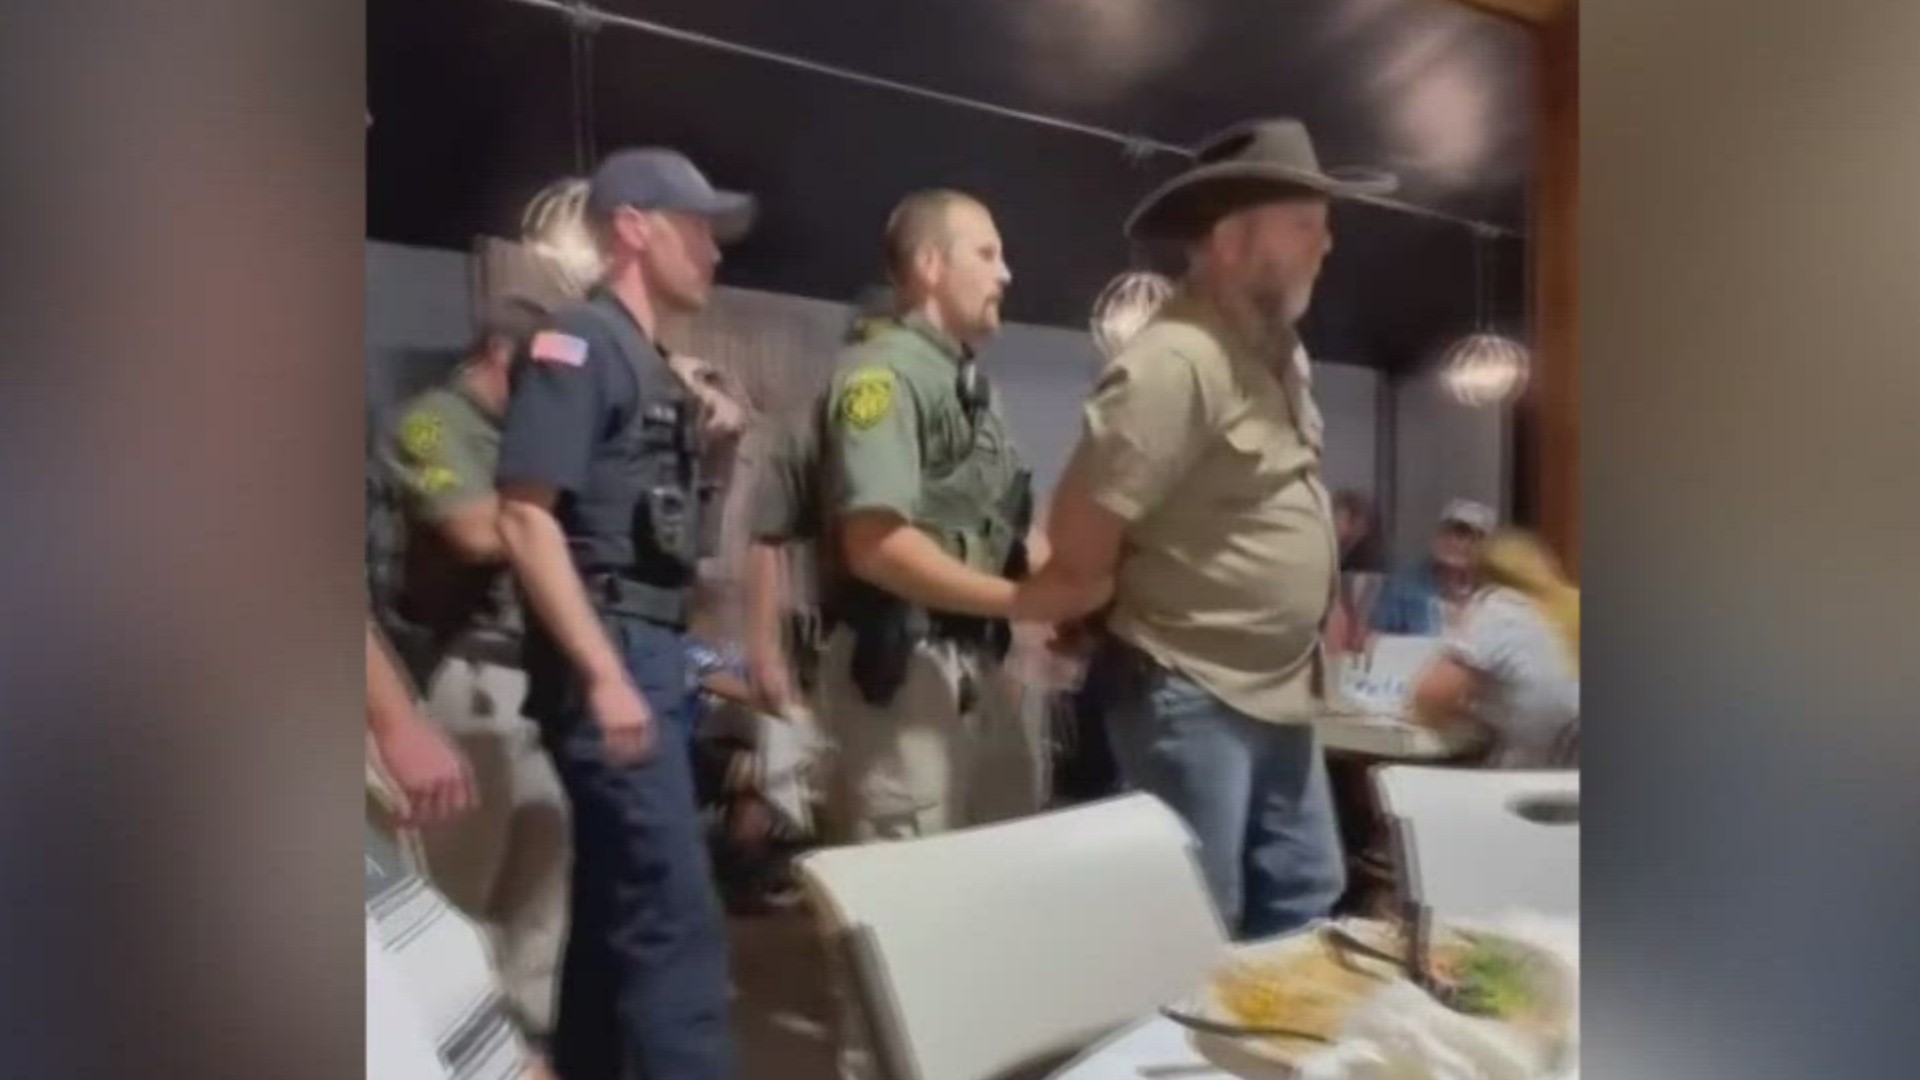 Ammon Bundy was arrested Friday by the Gem County Sheriff's Office on a warrant for contempt charges stemming from a legal battle with the St. Luke's Health System.